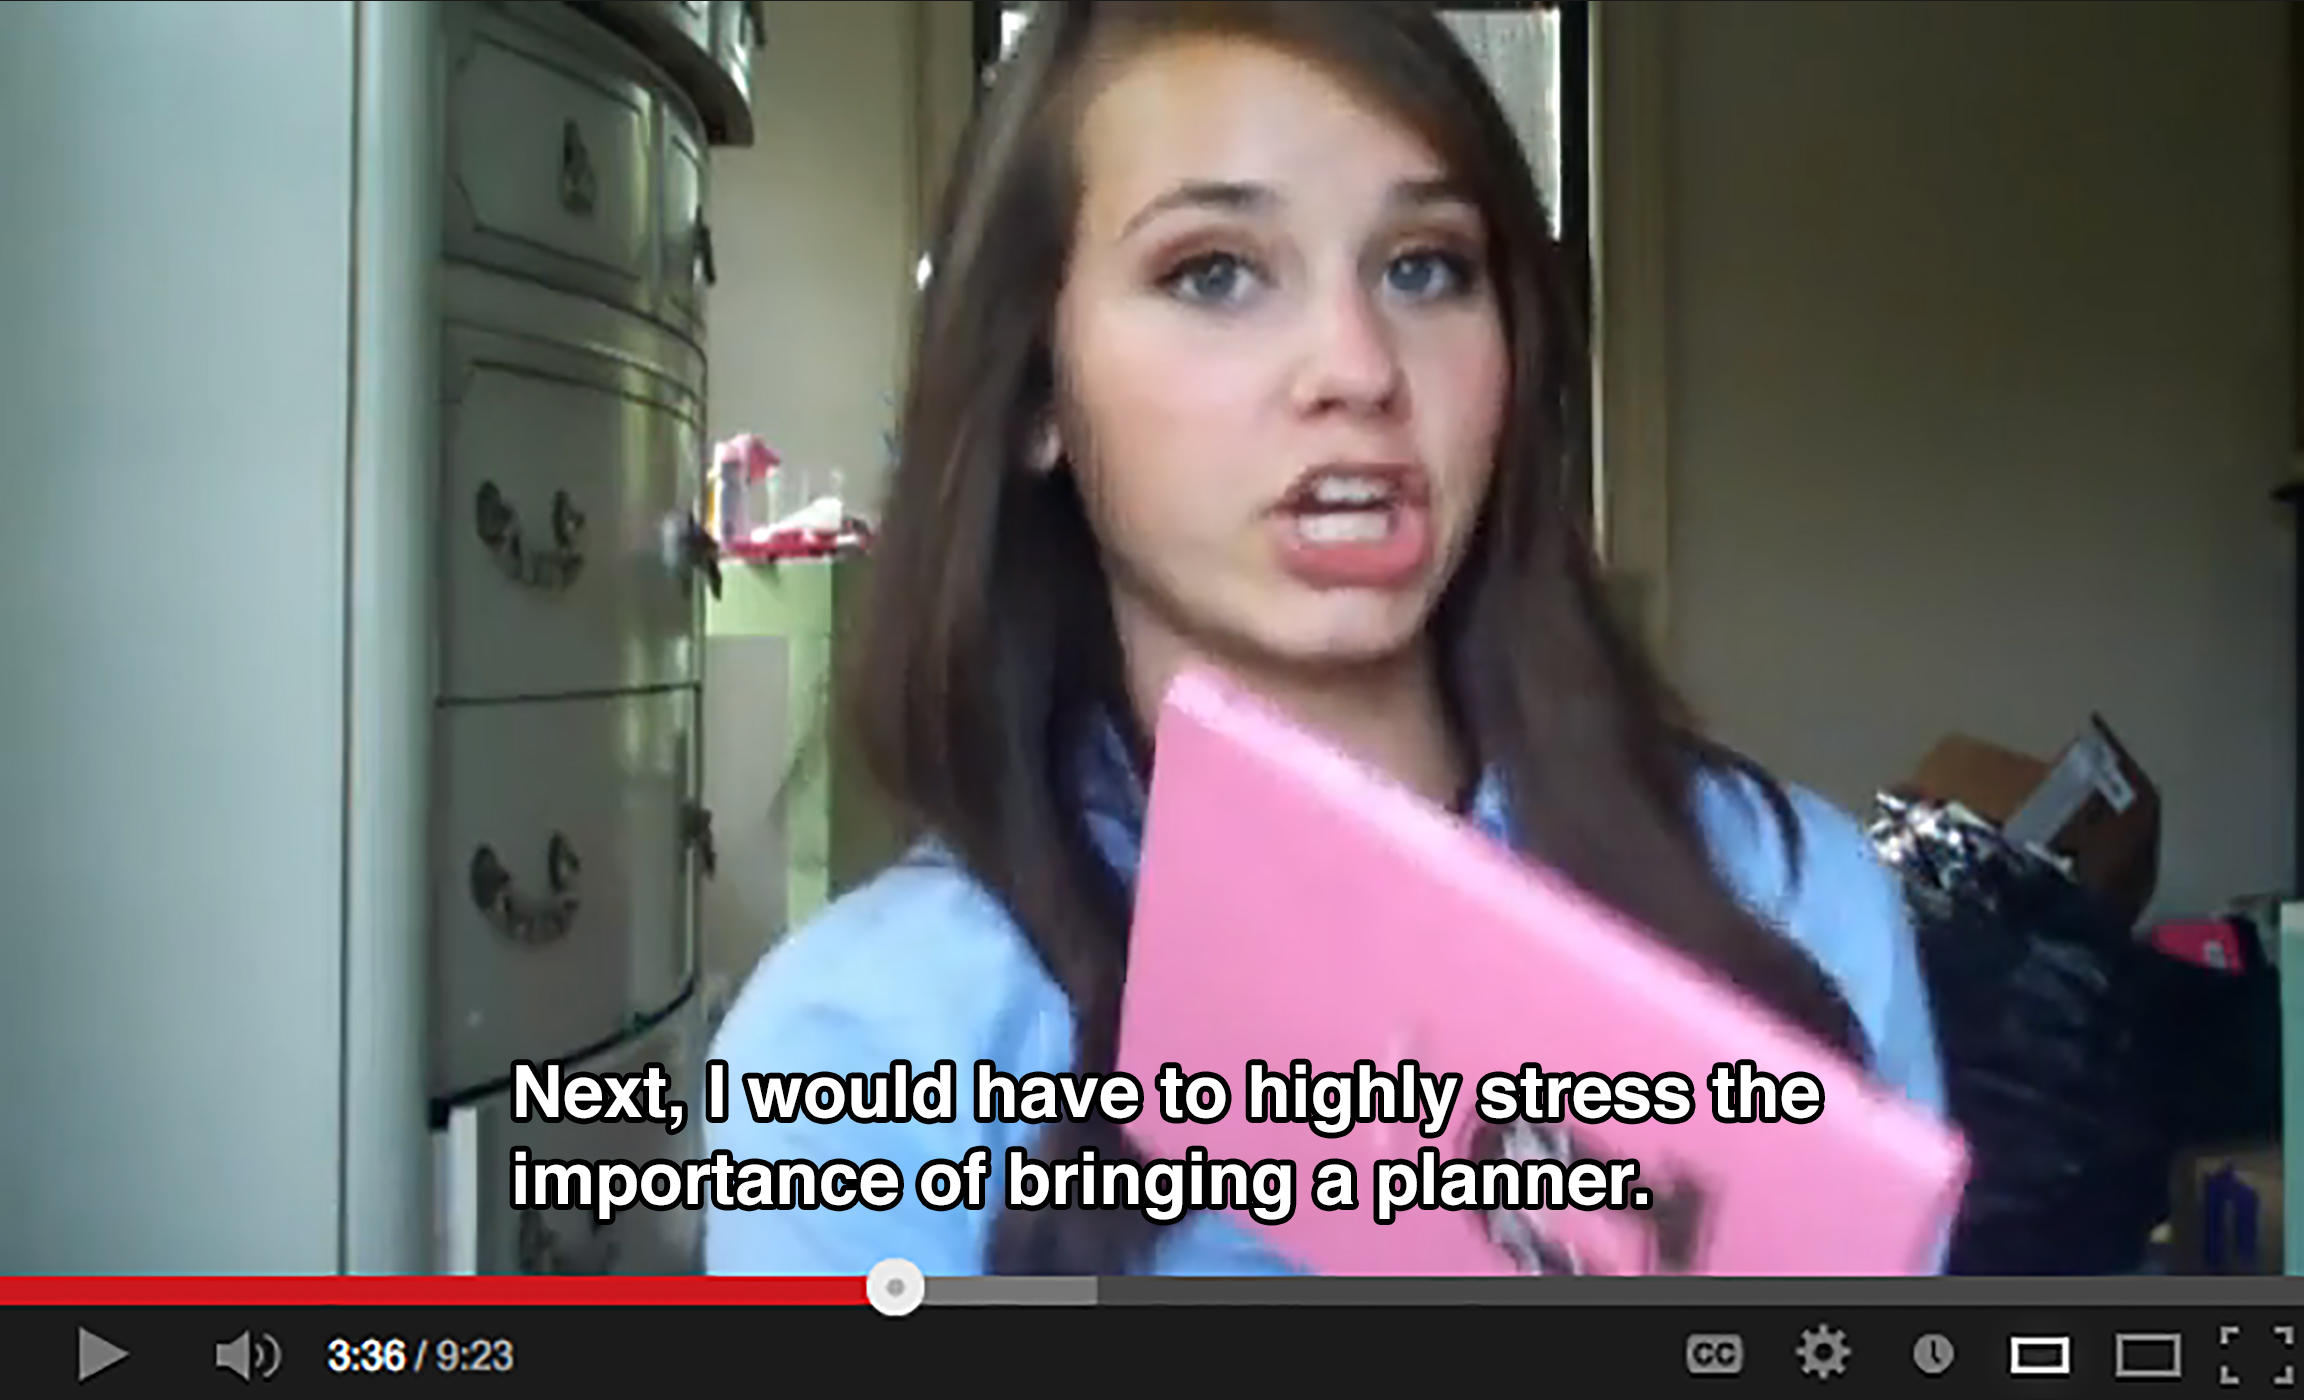 A teenager in a messy bedroom holds up a pink planner to the camera and says: Next, I would have to highly stress the importance of bringing a planner.